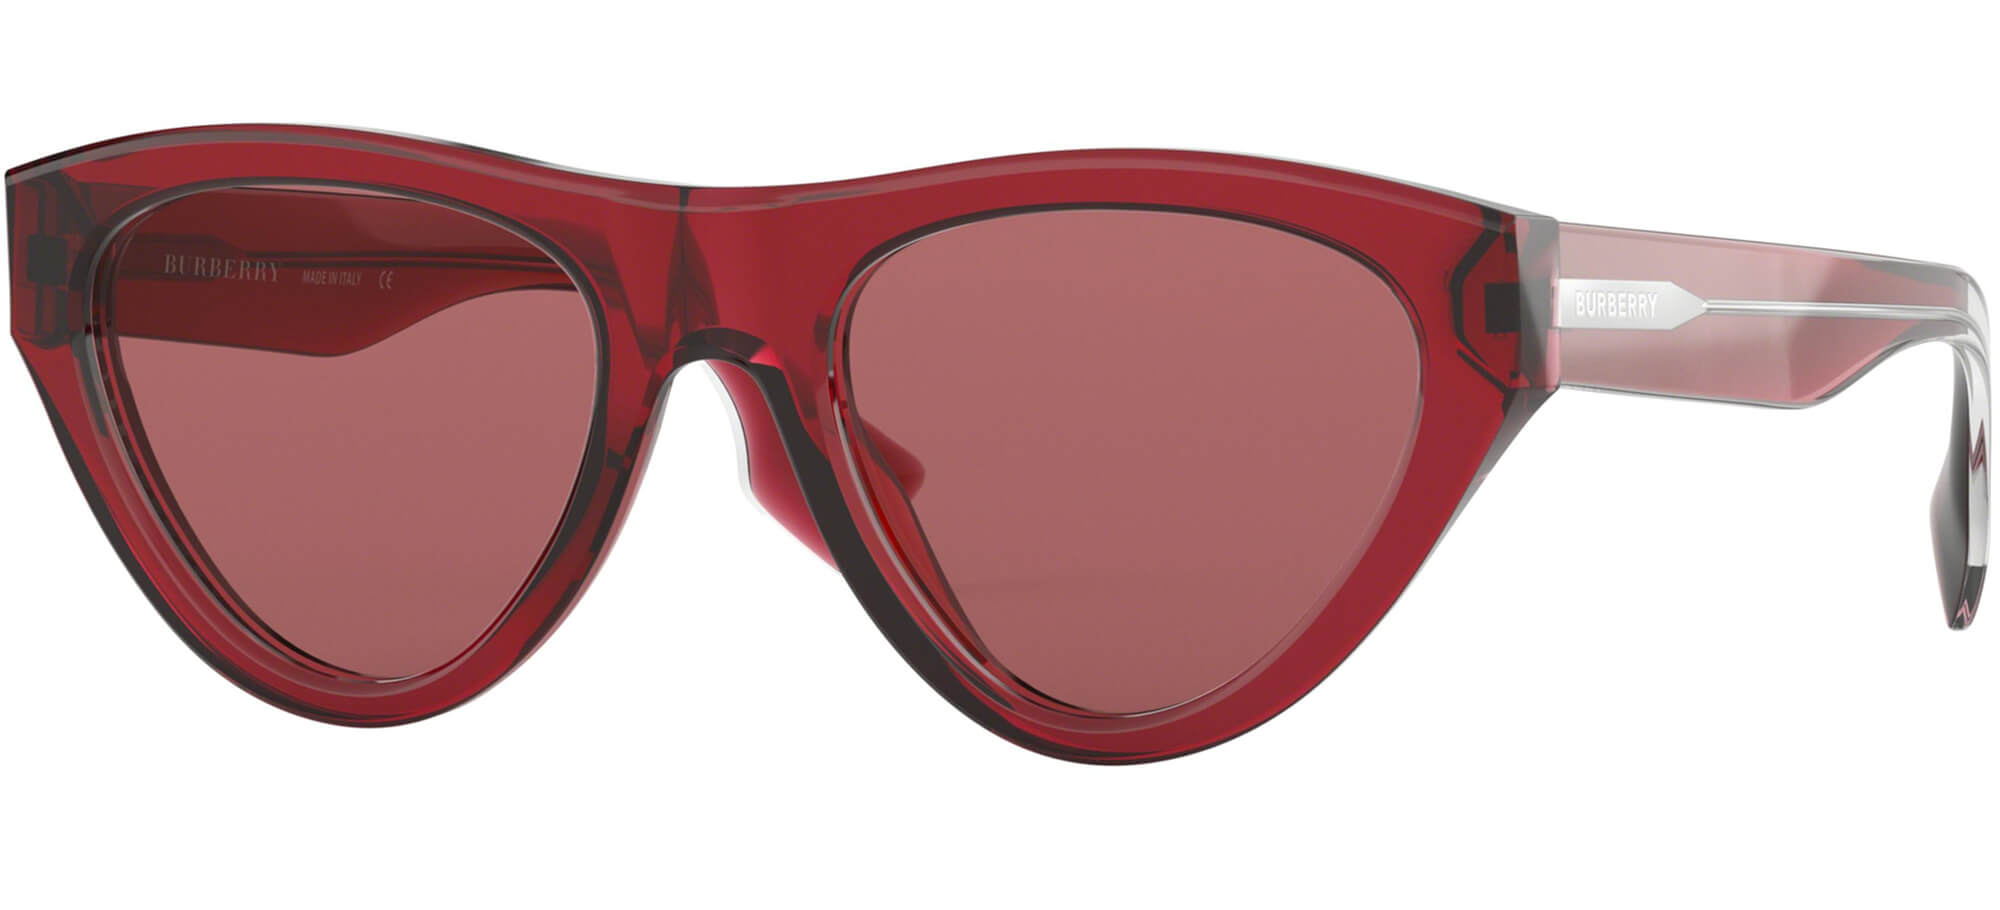 BurberryBE 4285Red/red (3796/75)